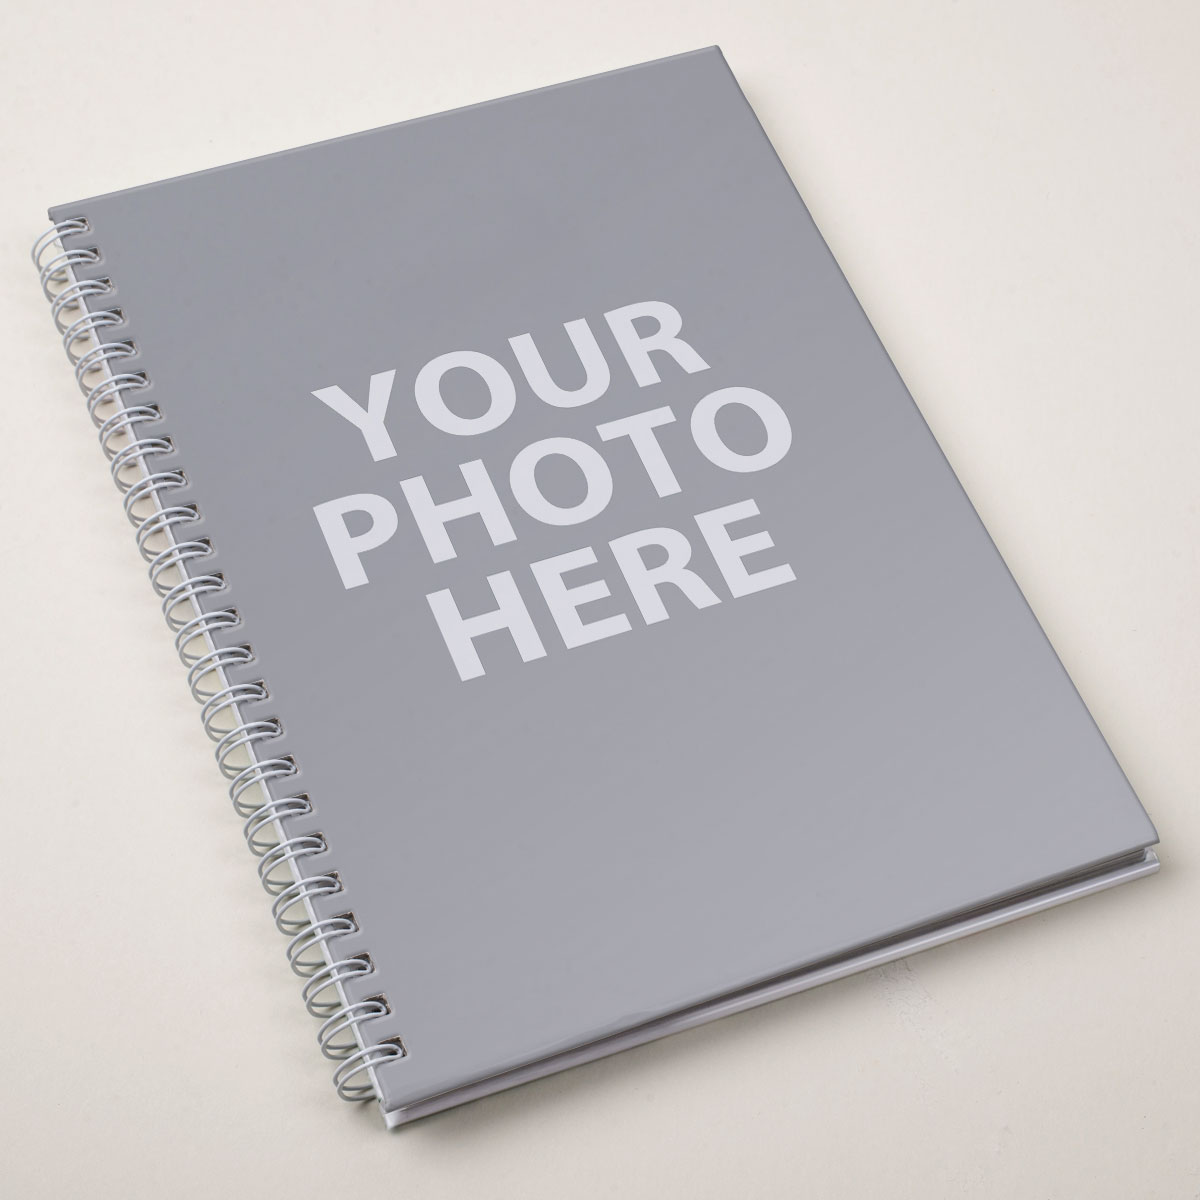 Create Your Own Photo Upload Notebook - Portrait Photograph